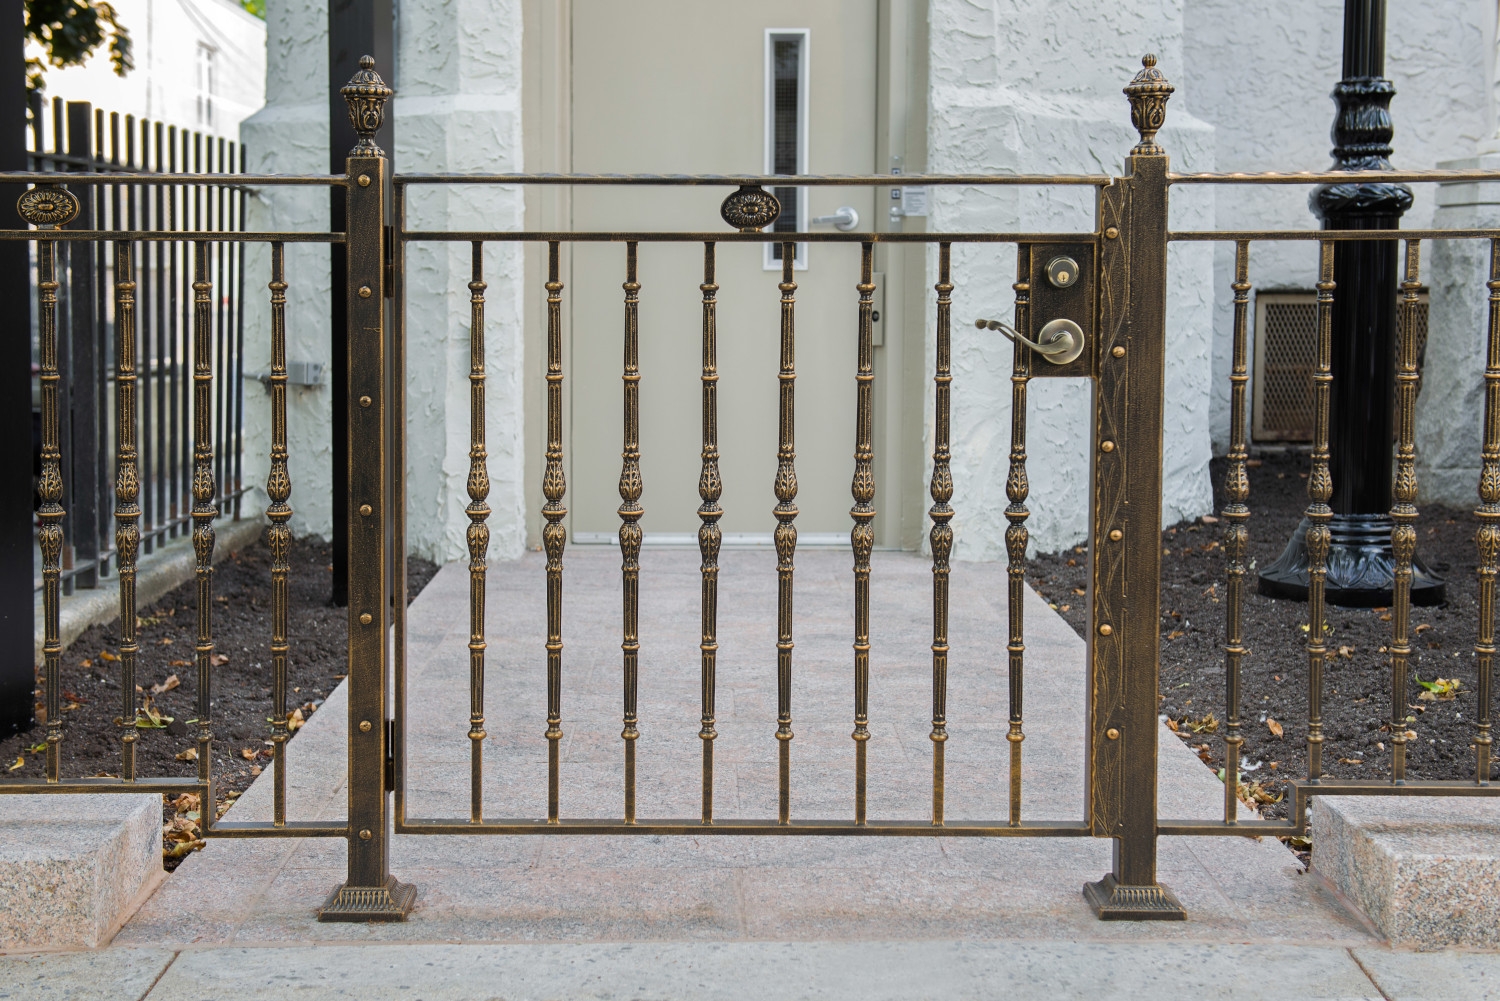 Ornate metal railings with a gate at Holy Cross Church